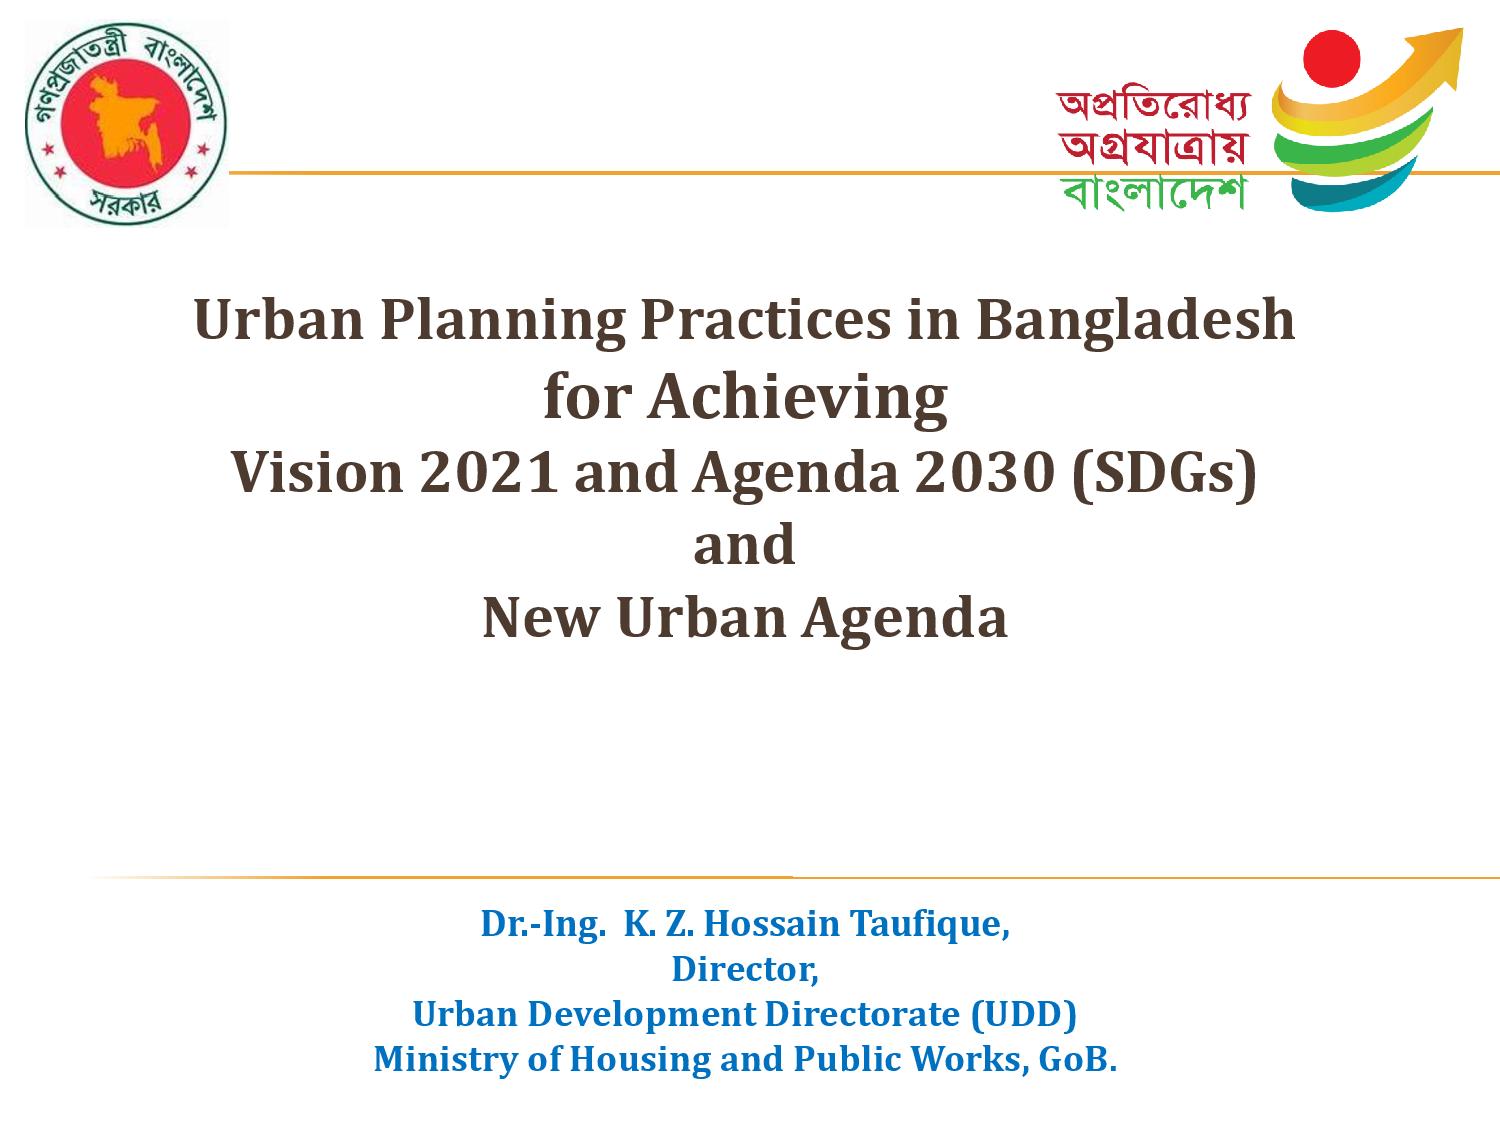 1st Spatial Planning Platform (SPP) Meeting: Part II – Urban Planning Practices in Bangladesh for Achieving Vision 2021 and Agenda 2030 (SDGs) and New Urban Agenda